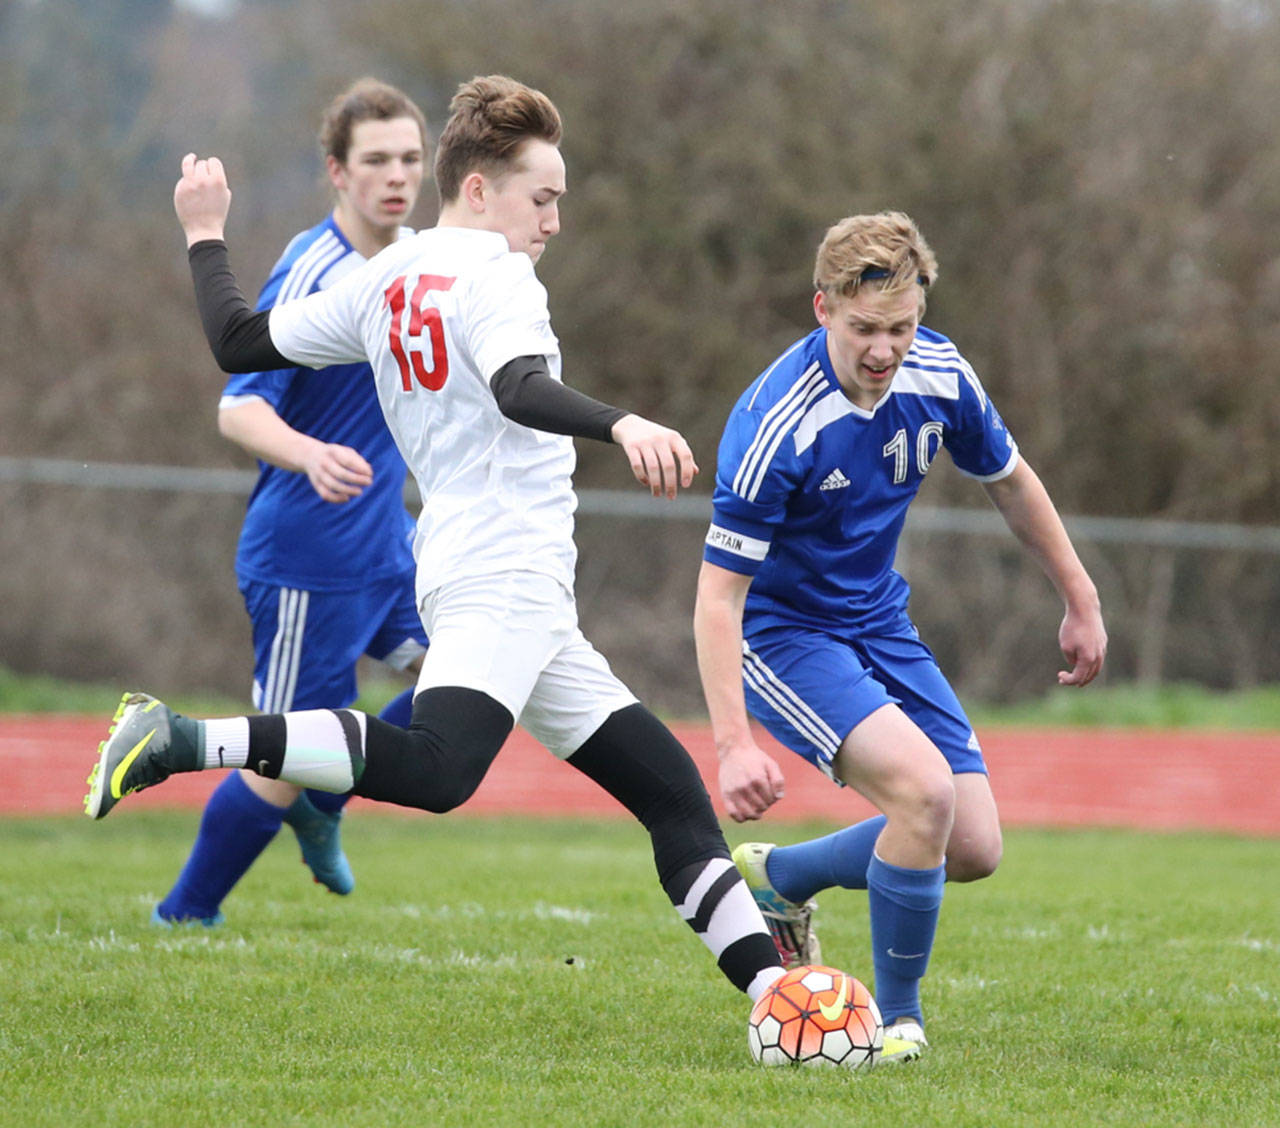 Ethan Spark (15) is one of Coupeville’s captains this spring. (Photo by John Fisken)